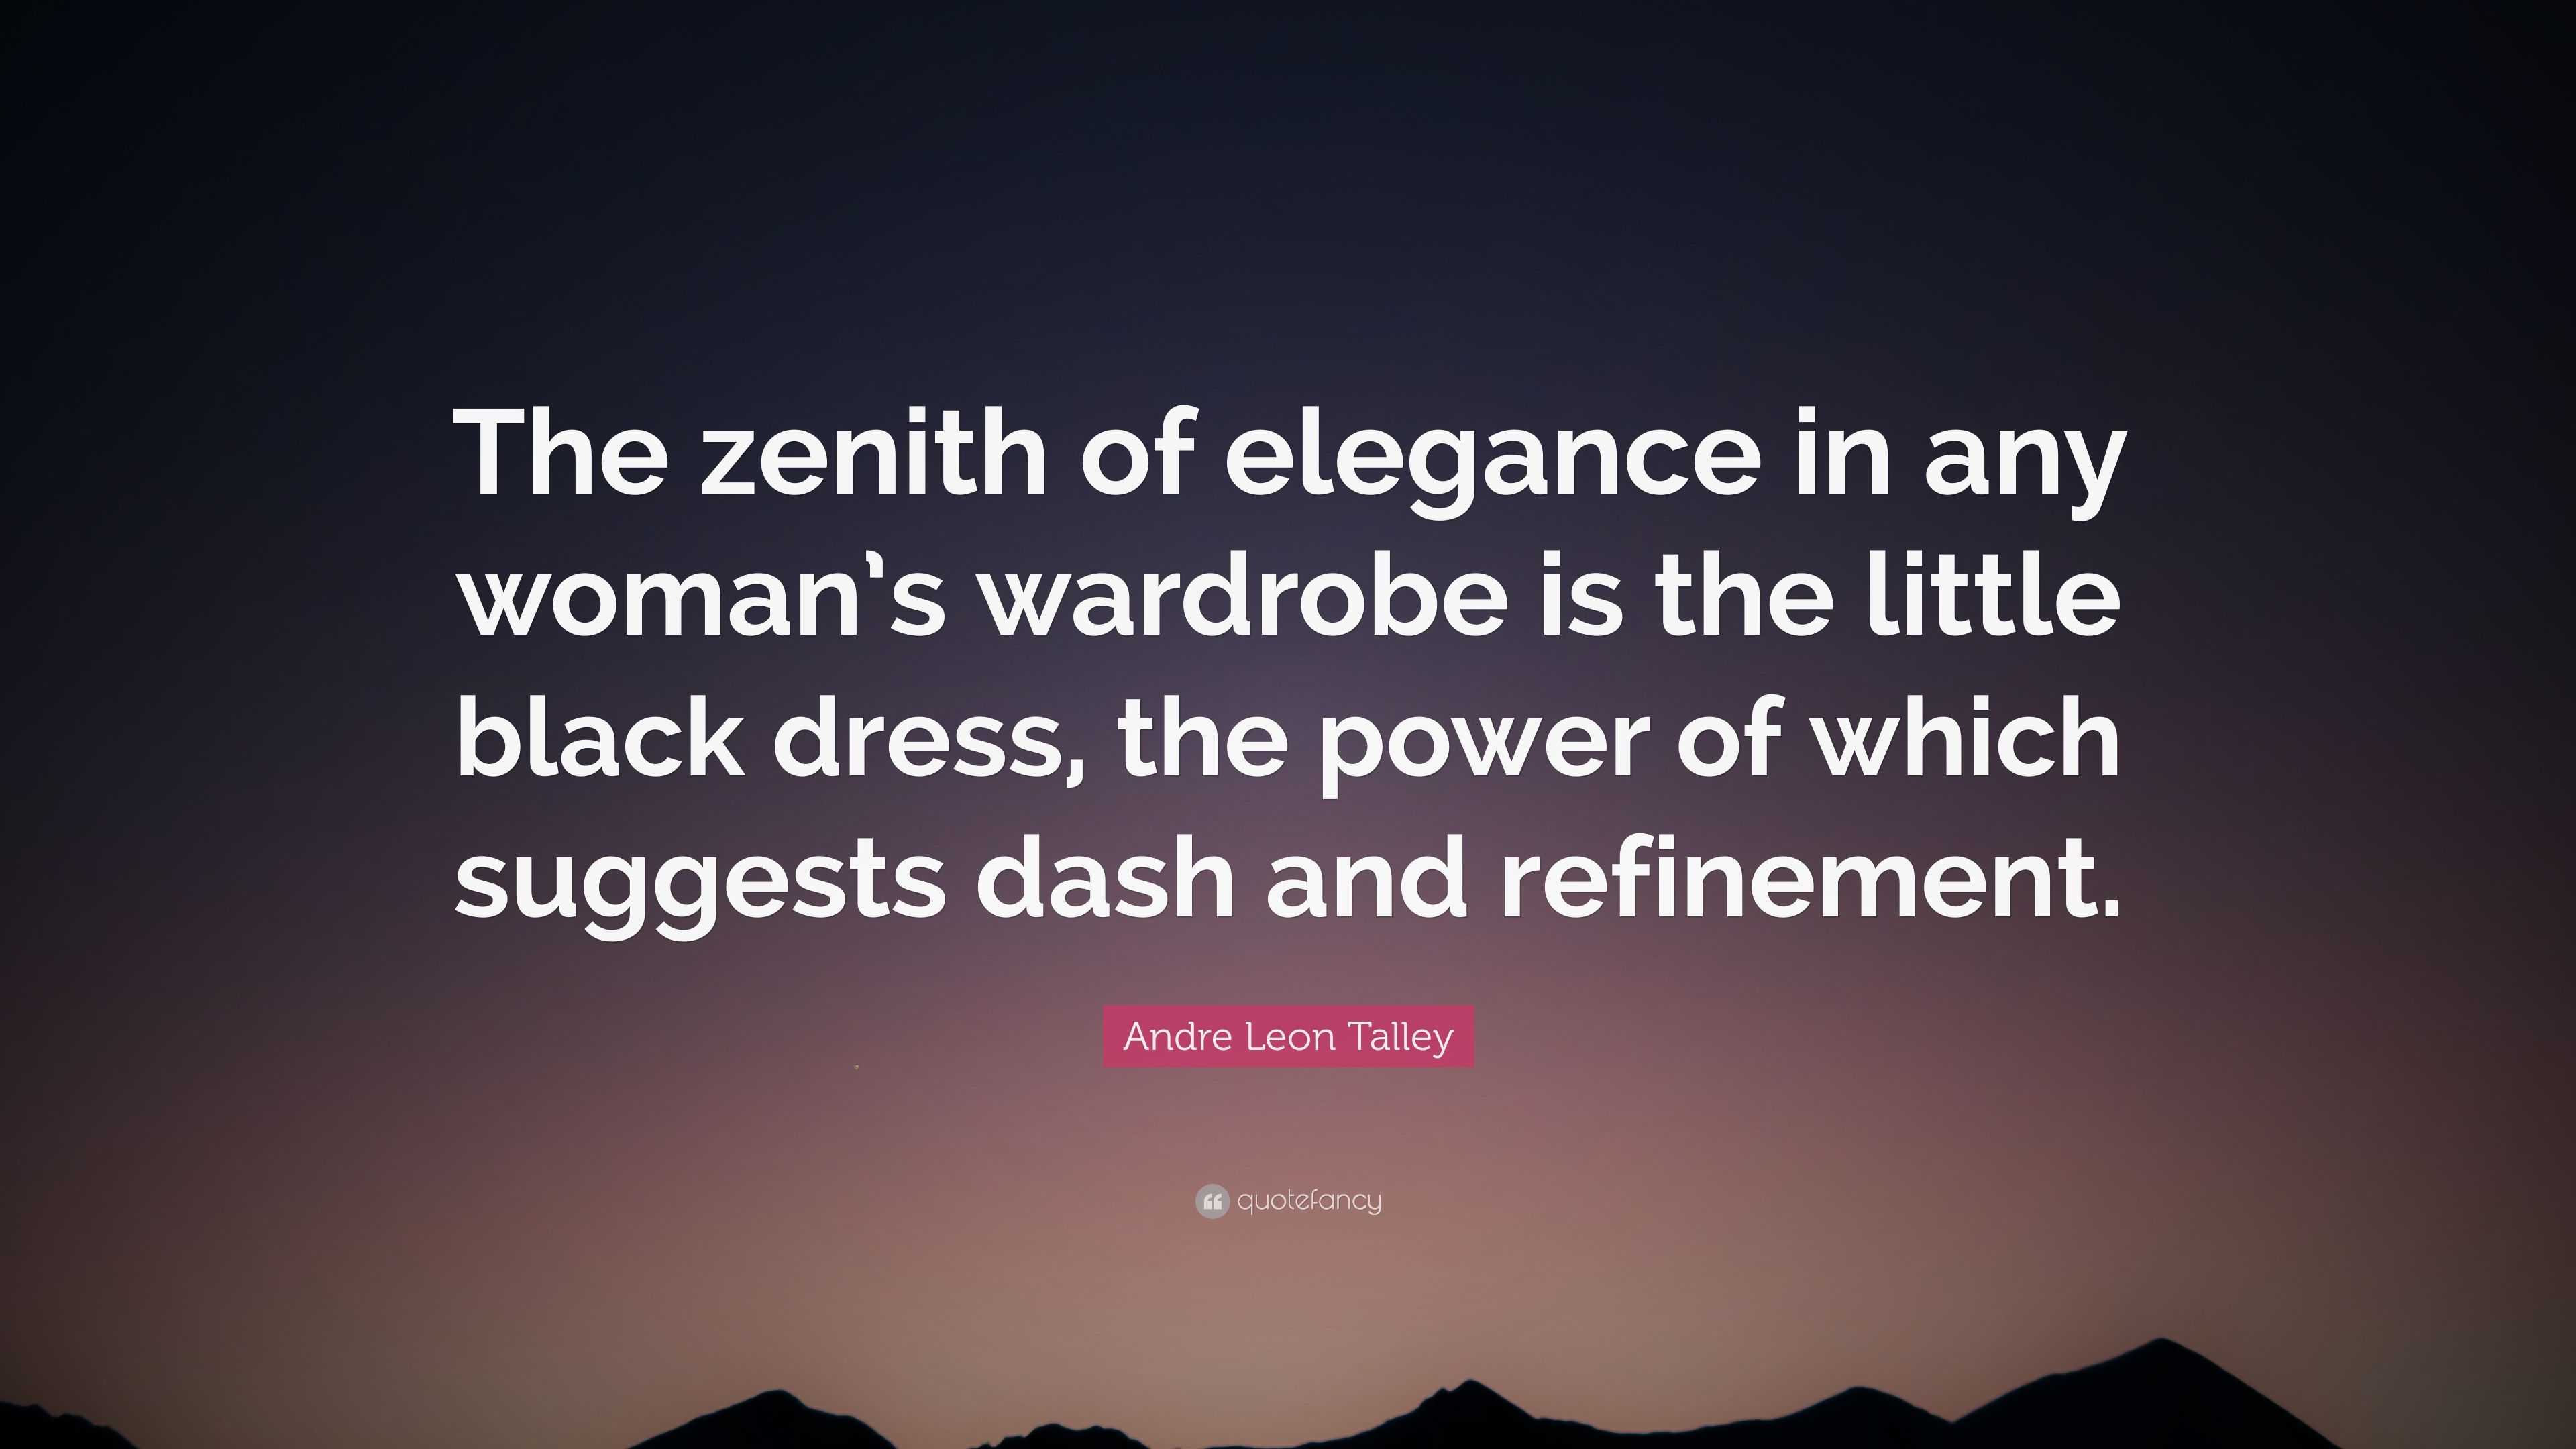 Andre Leon Talley Quote: “The zenith of elegance in any woman’s ...